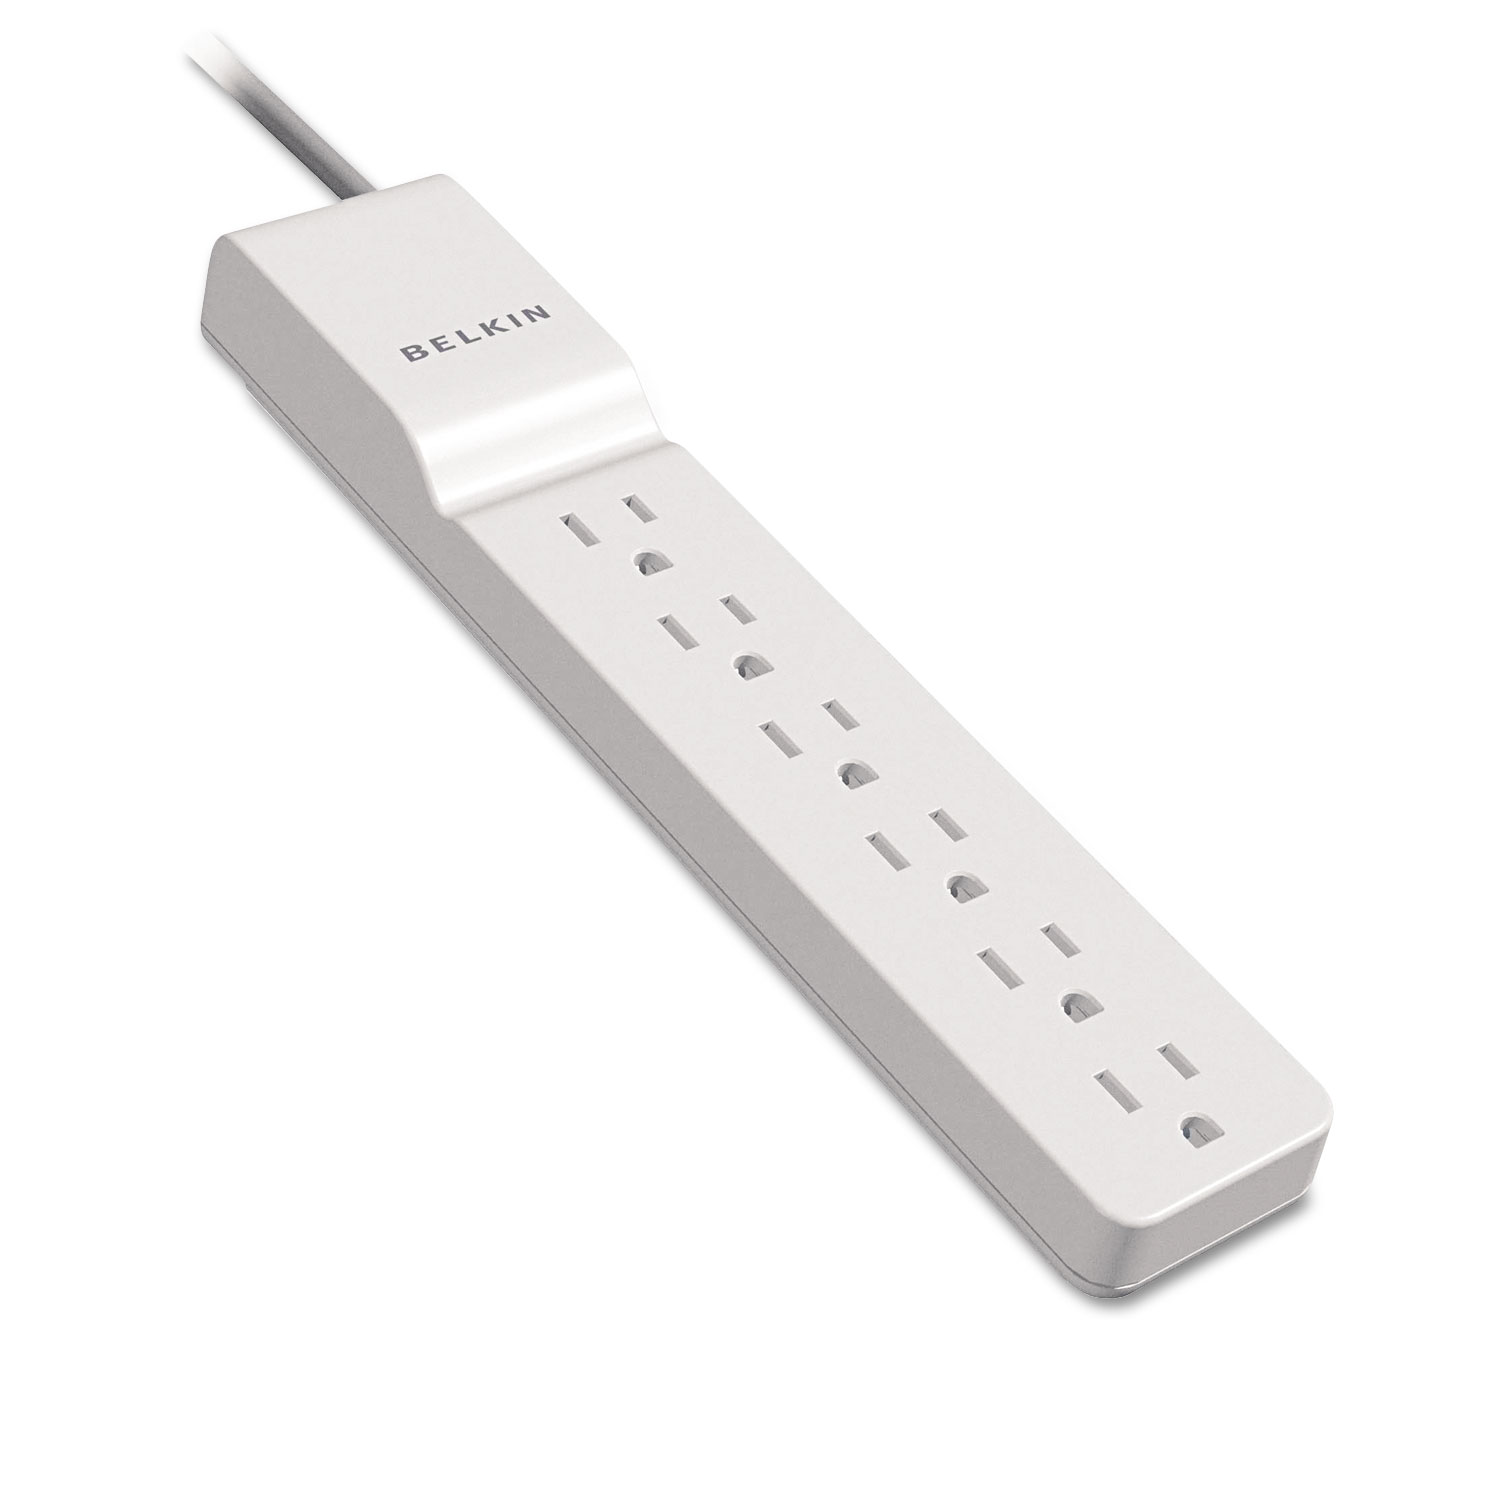  Belkin BE106000-04 Home/Office Surge Protector, 6 Outlets, 4 ft Cord, 720 Joules, White (BLKBE10600004) 